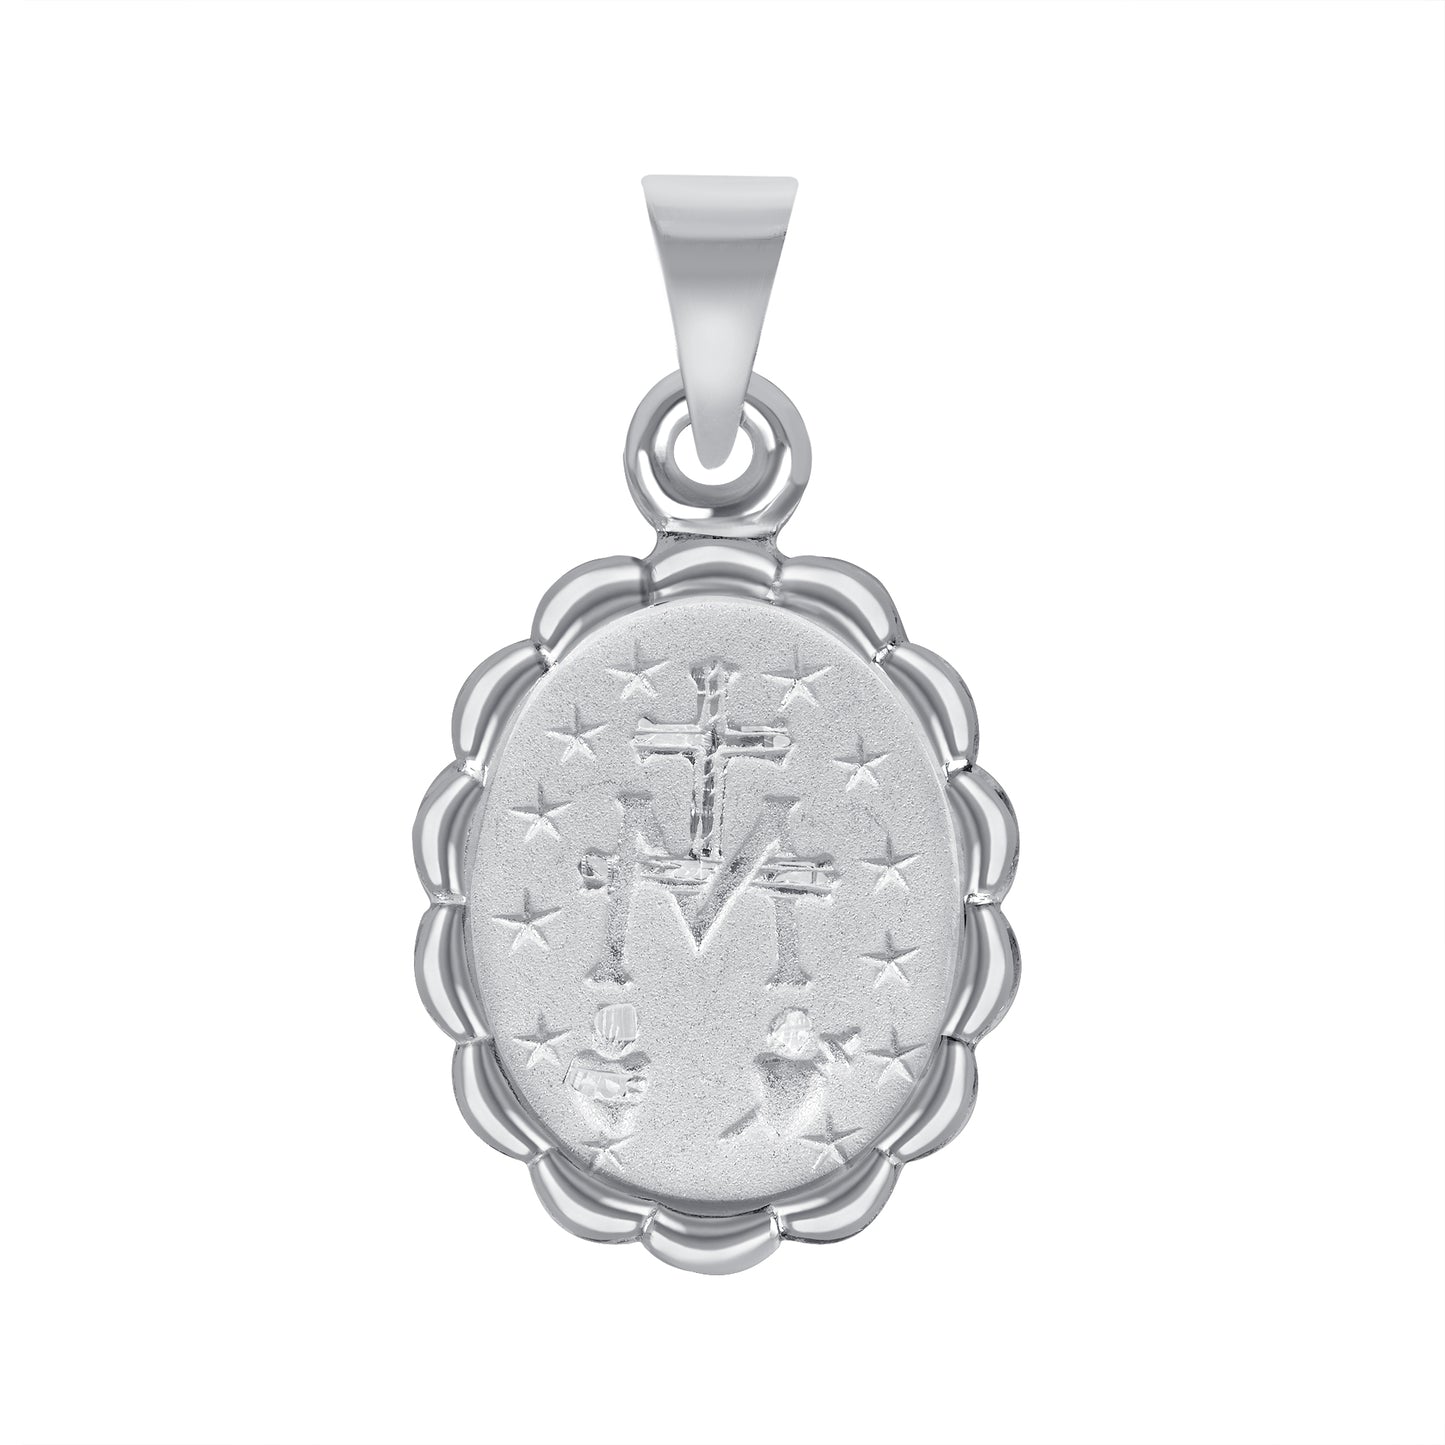 Silver 925 Virgin Miraculous Two-Sided Oval Puff Pendant. MEDA68